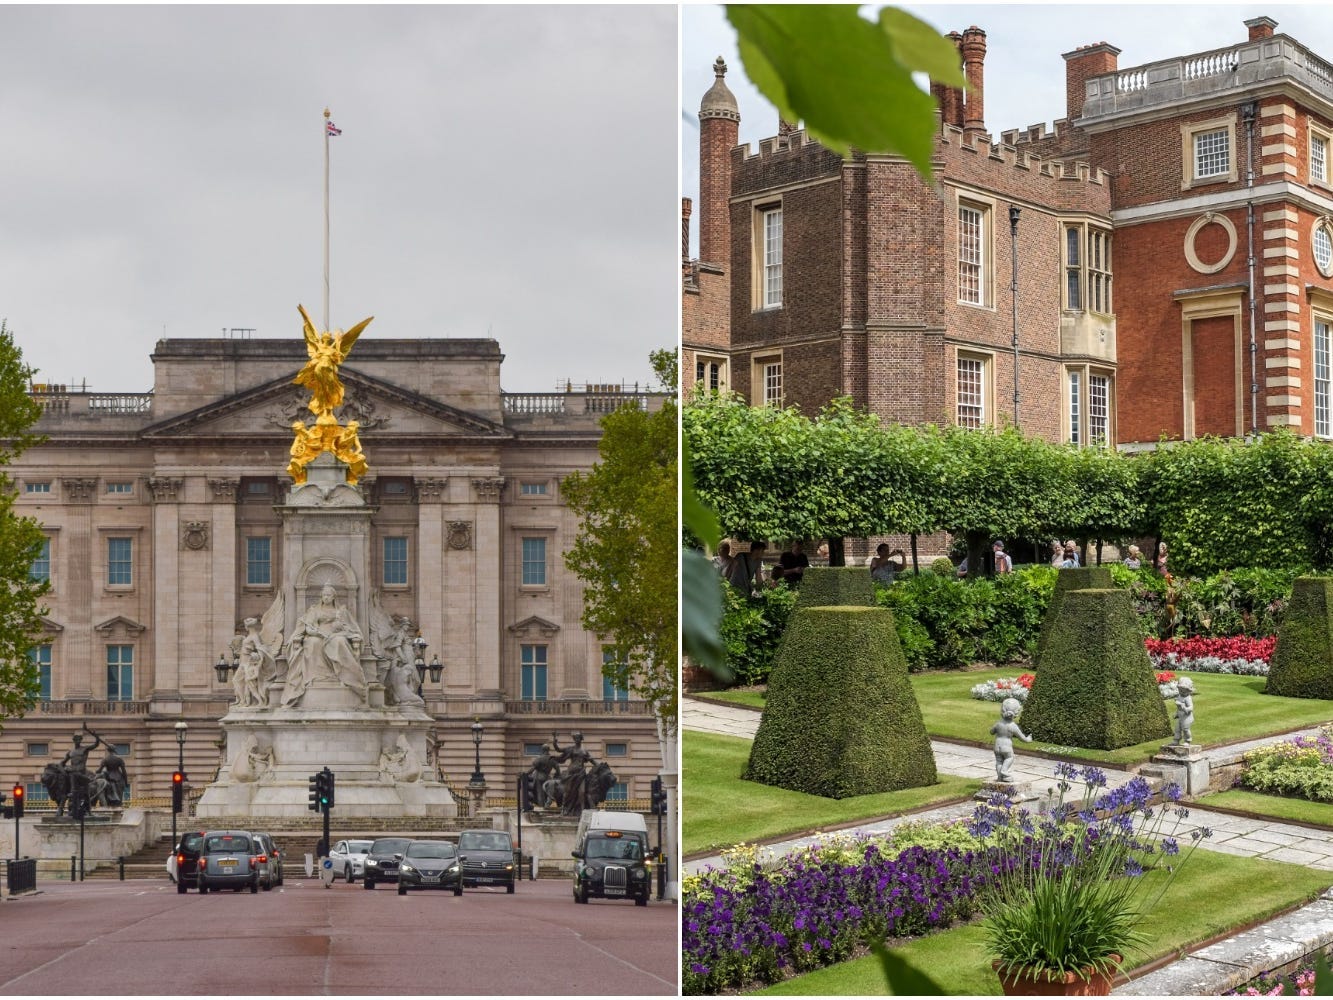 Buckingham Palace pictured from the exterior (left) and an outside view of Hampton Court Palace being toured by visitors (right).